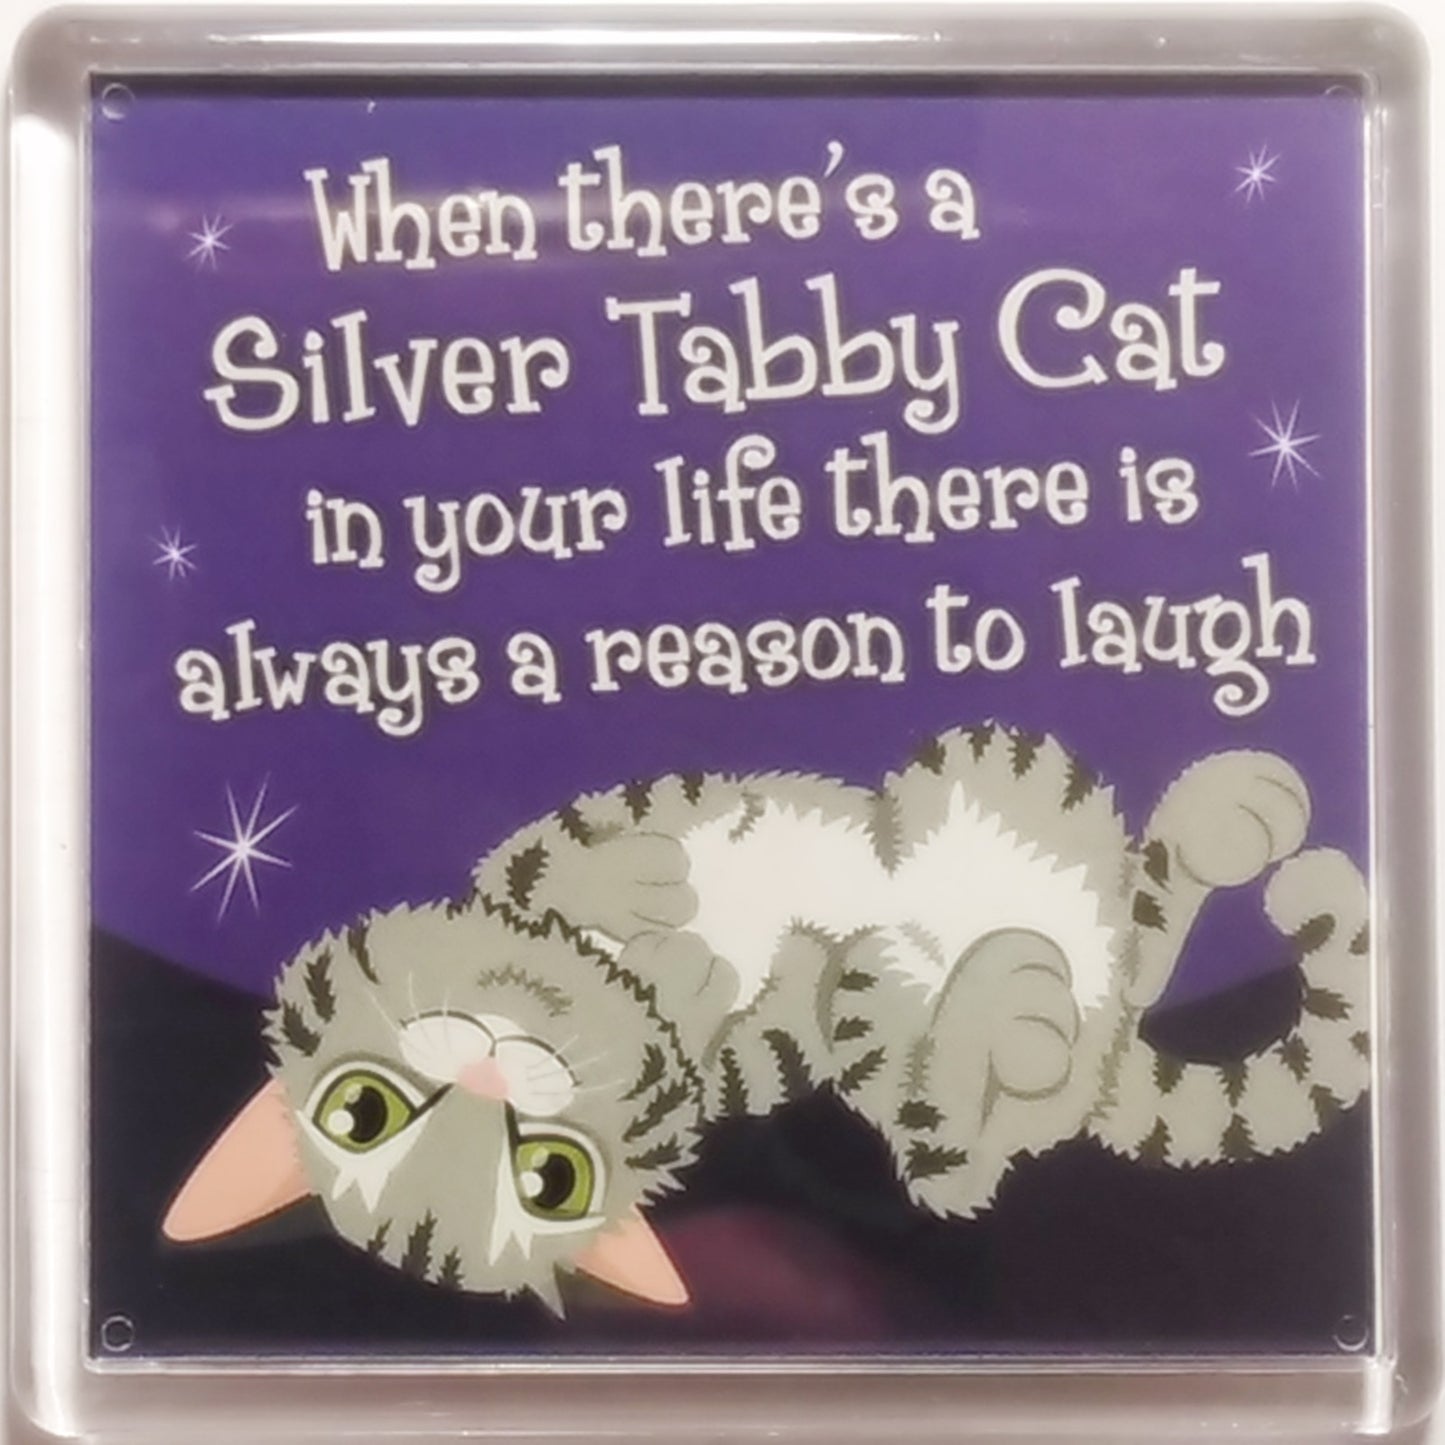 Wags & Whiskers Dog Magnet "Silver Tabby Wags & Whiskers Cat (life)" by Paper Island